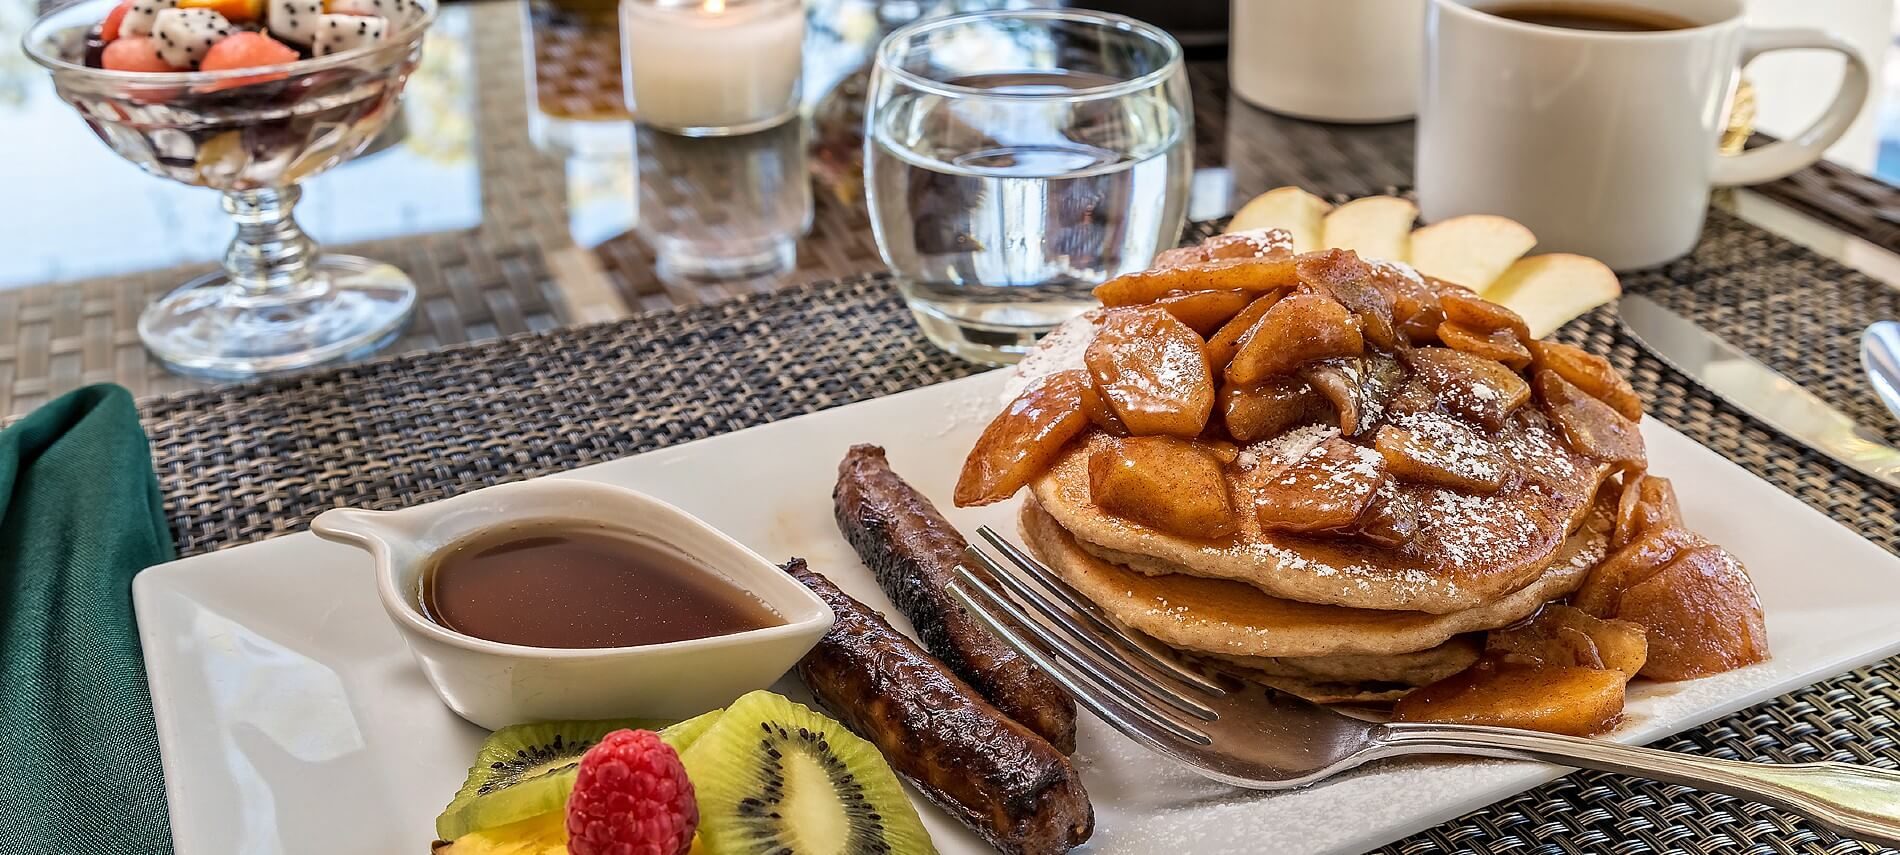 Rectangular white plate with stack of pancakes topped with fruit, two sausage links and bowl of syrup